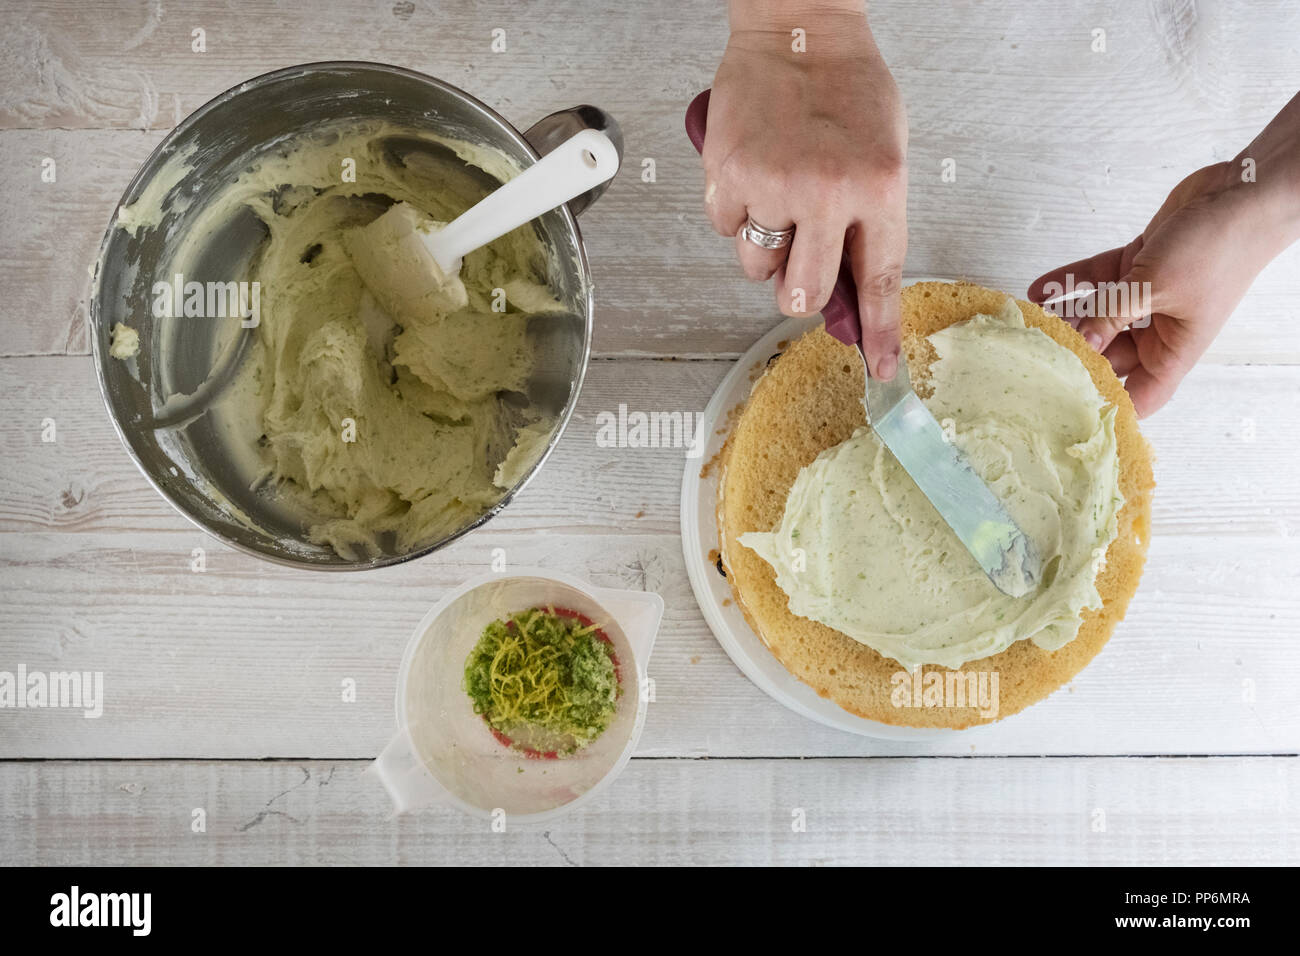 A fresh gin and tonic flavoured baked cake being iced, a hand with a palette knife smoothing icing, and a bowl of fresh icing and lemon zest. Stock Photo